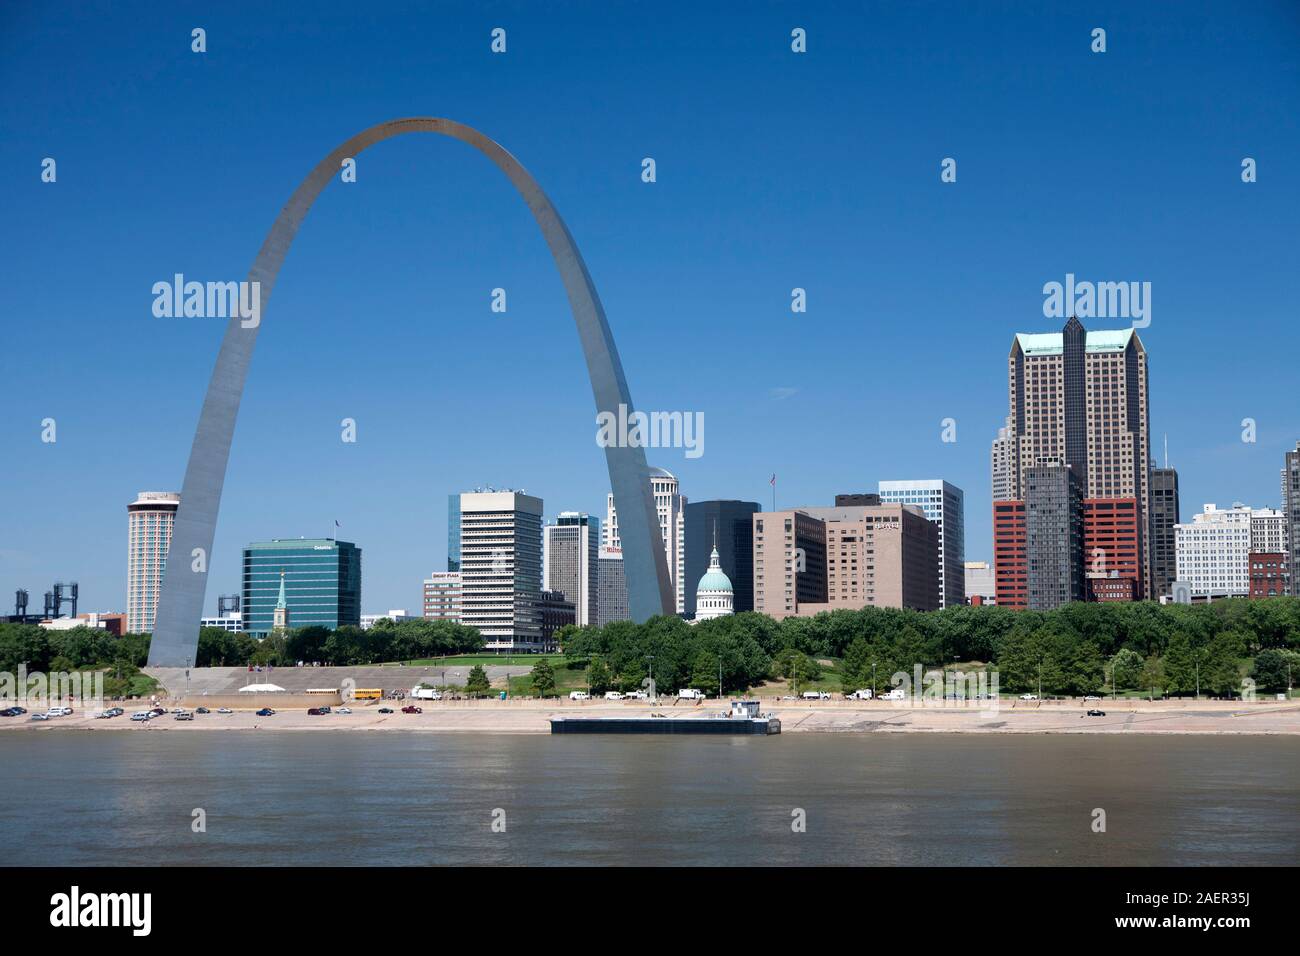 View of the St. Louis Arch from across the Mississippi River Stock Photo